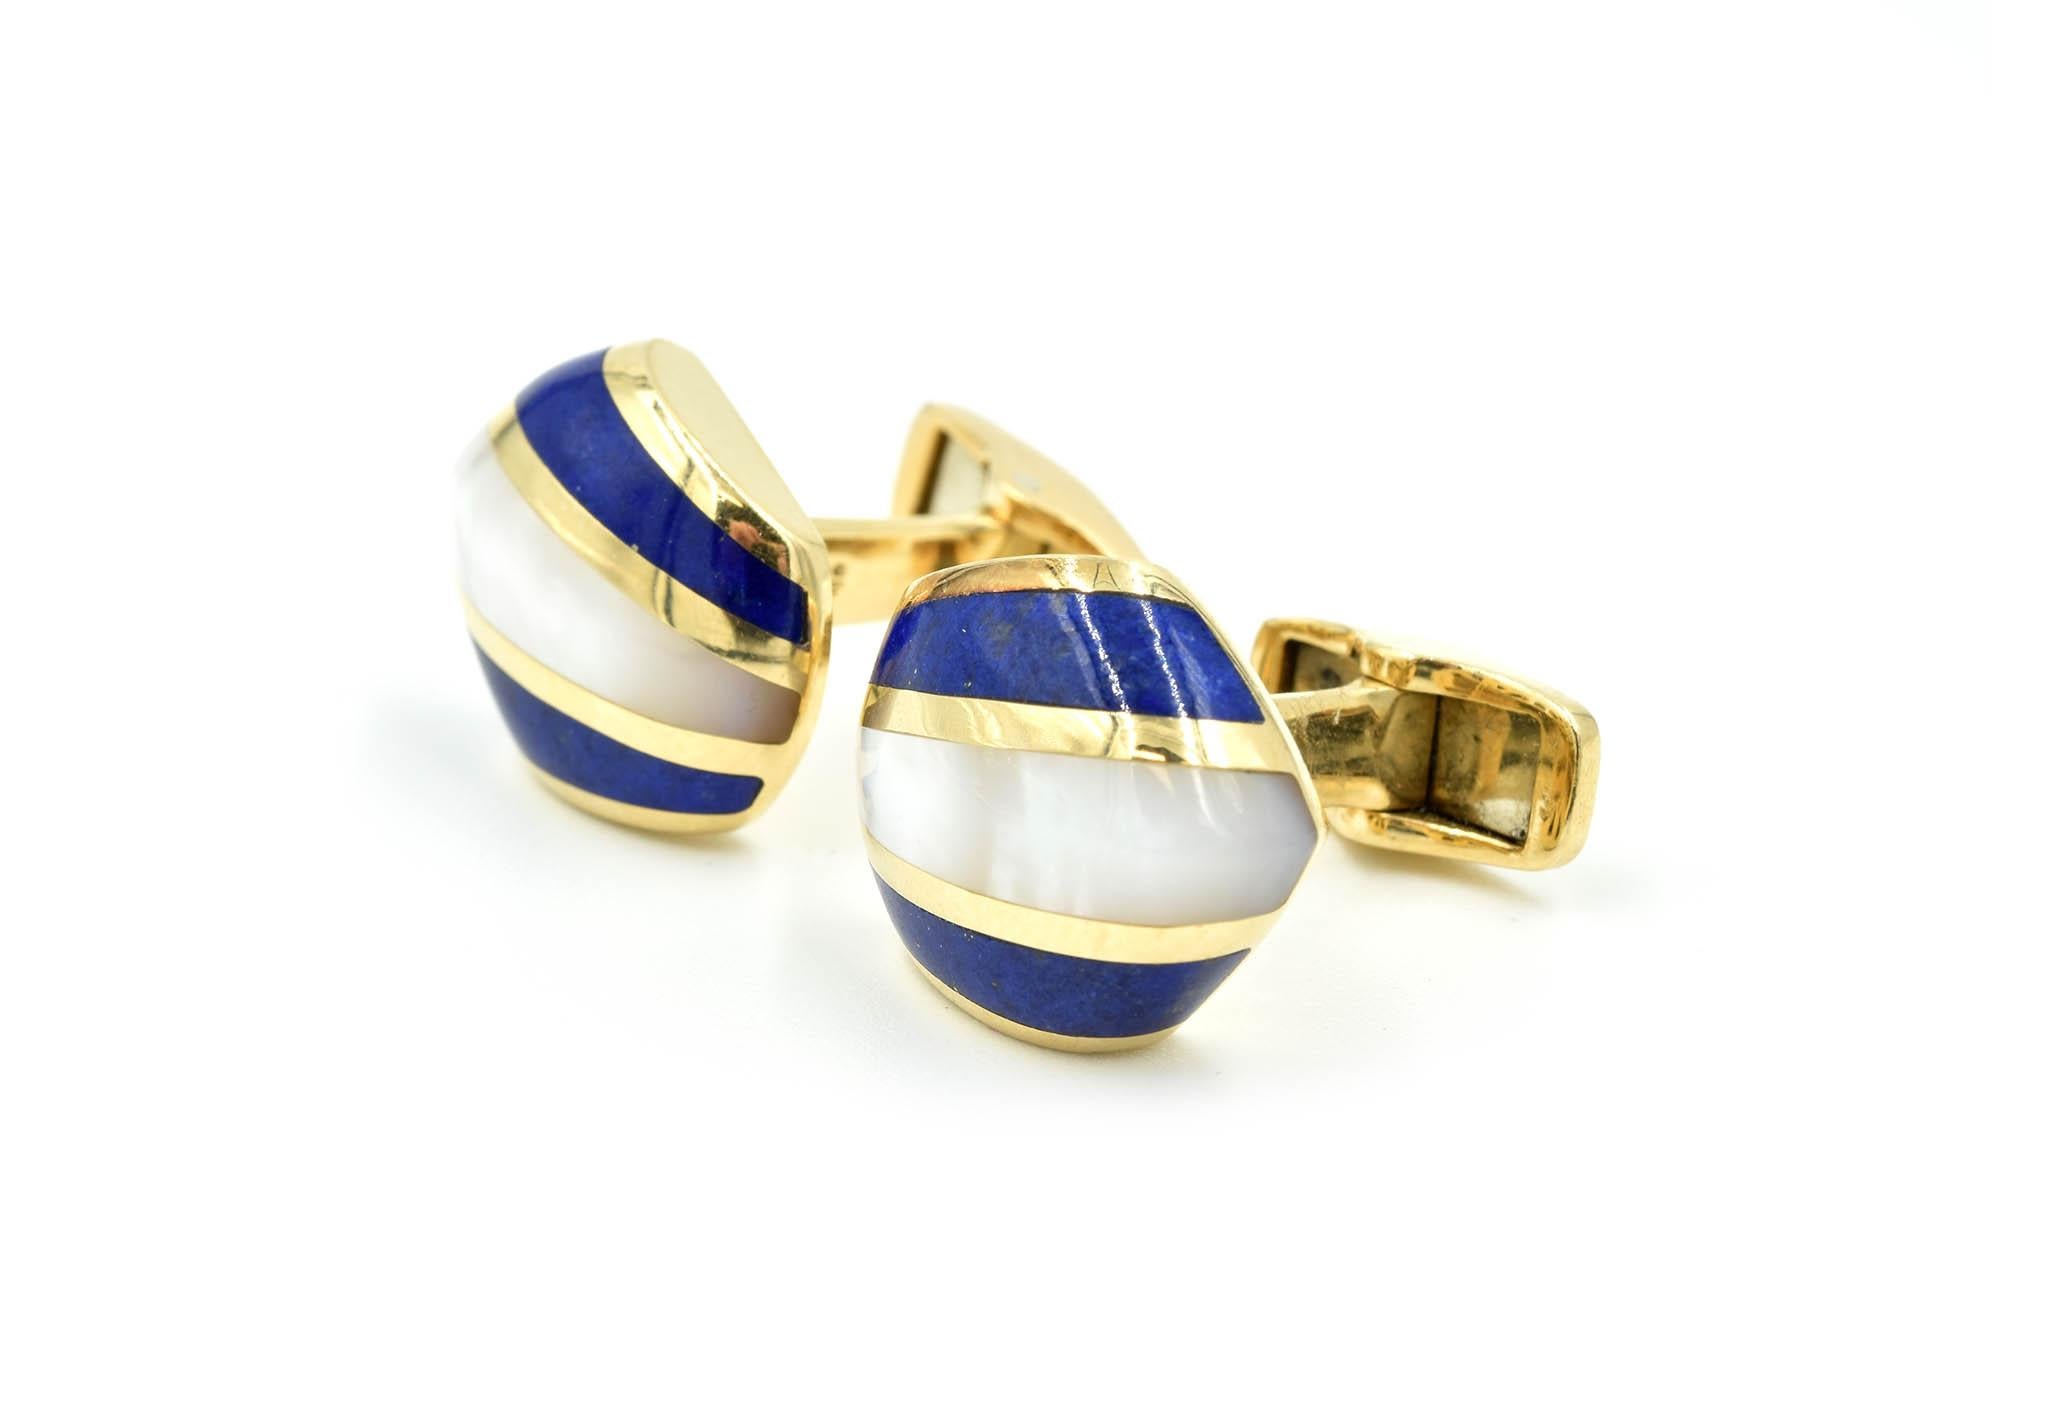 Modern 14 Karat Yellow Gold and Mother-of-Pearl with Lapis Inlay Cufflinks